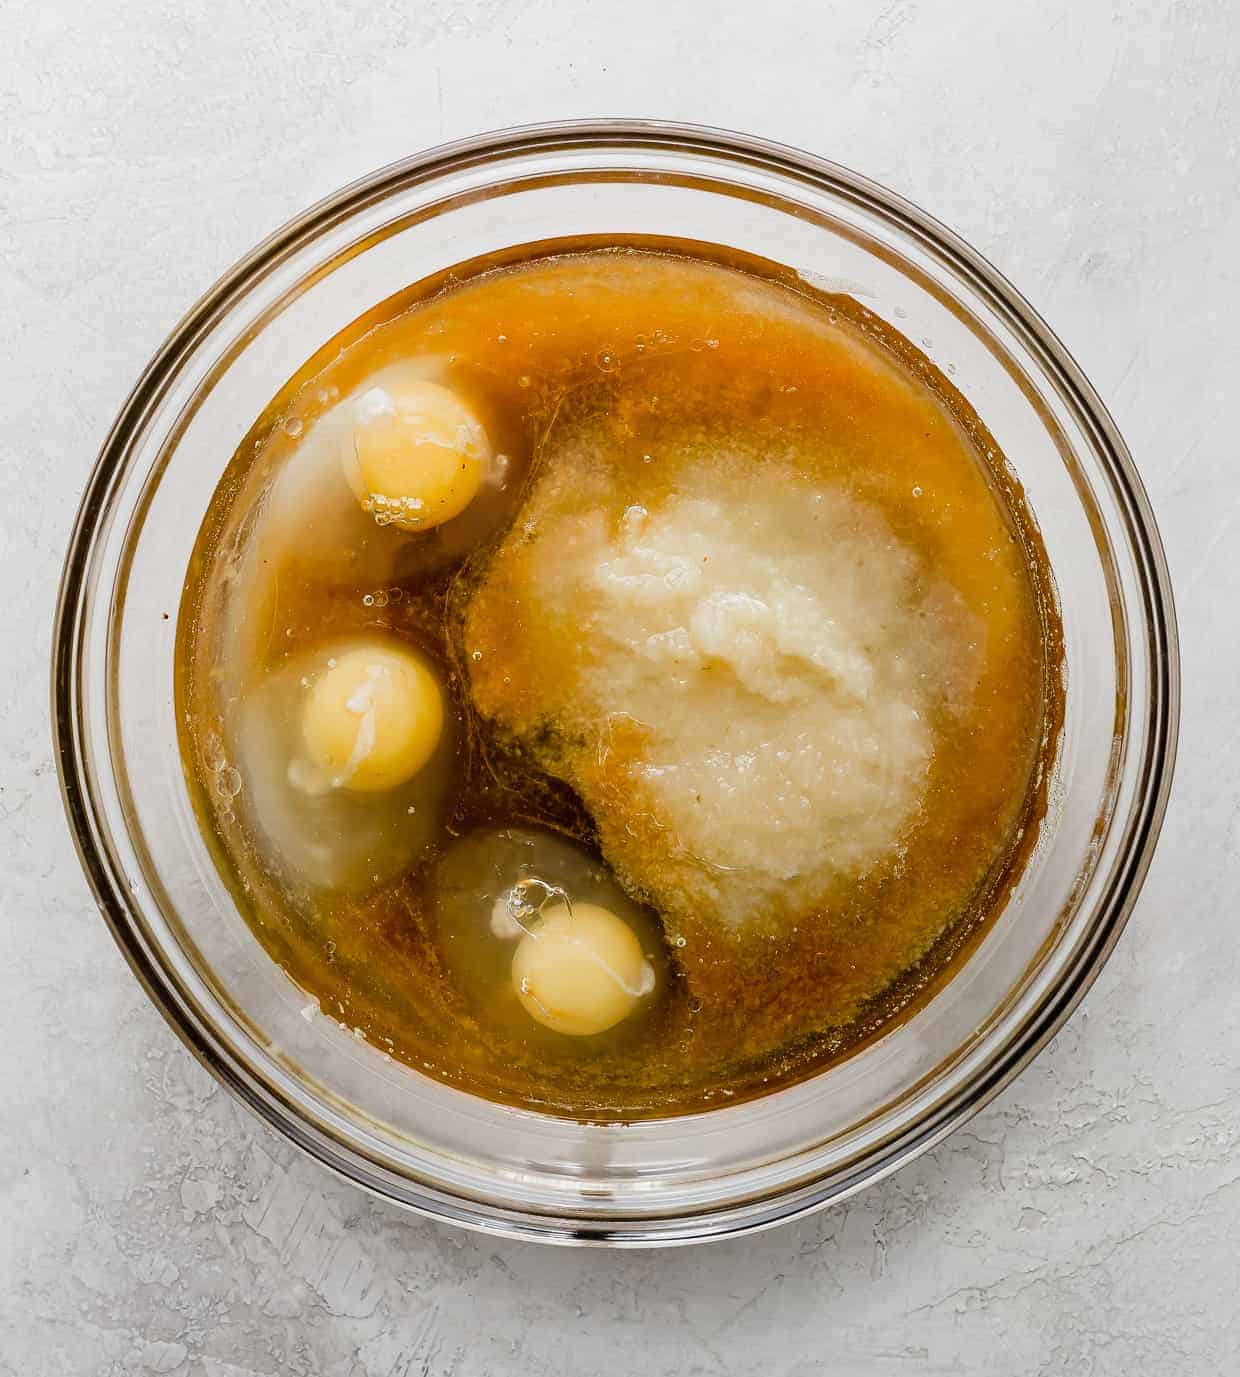 "Wet ingredients" in a glass bowl, consisting of 3 eggs, oil, apple sauce and vanilla.